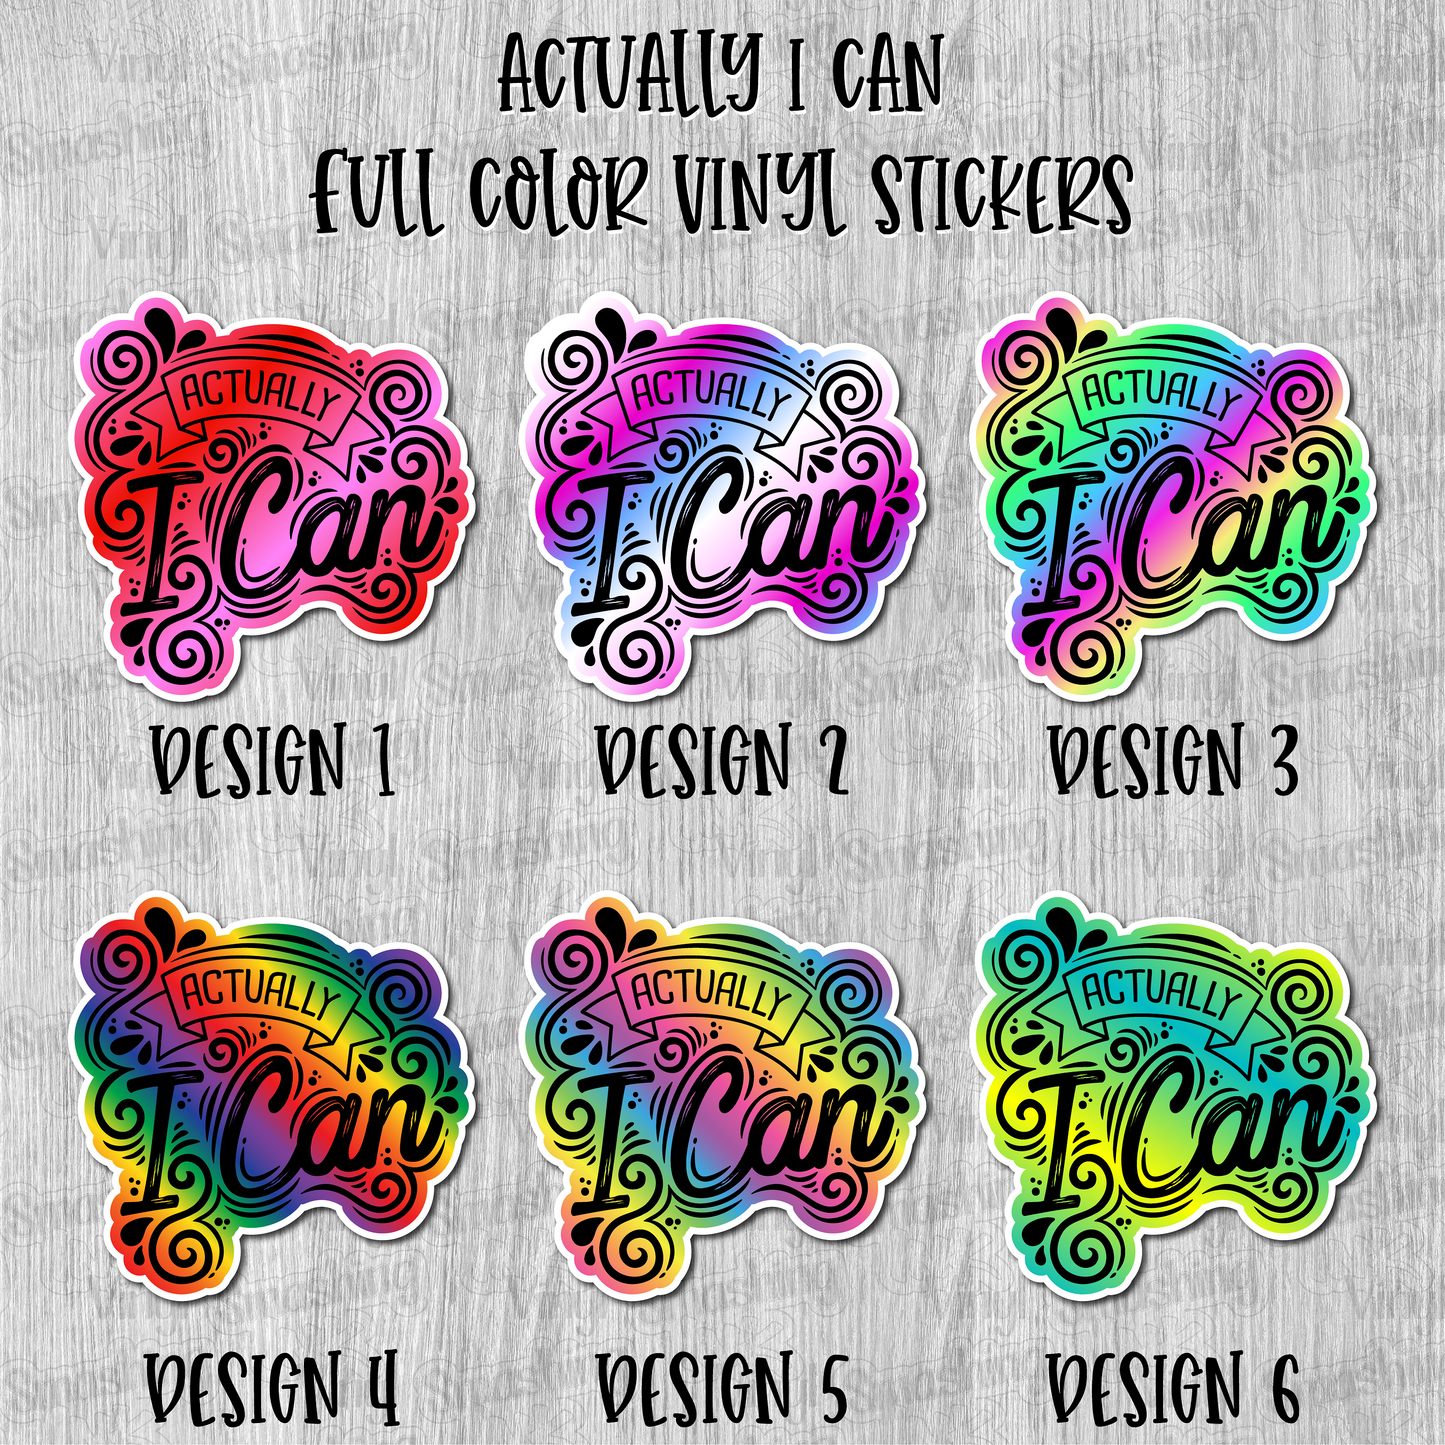 I Can - Full Color Vinyl Stickers (SHIPS IN 3-7 BUS DAYS)